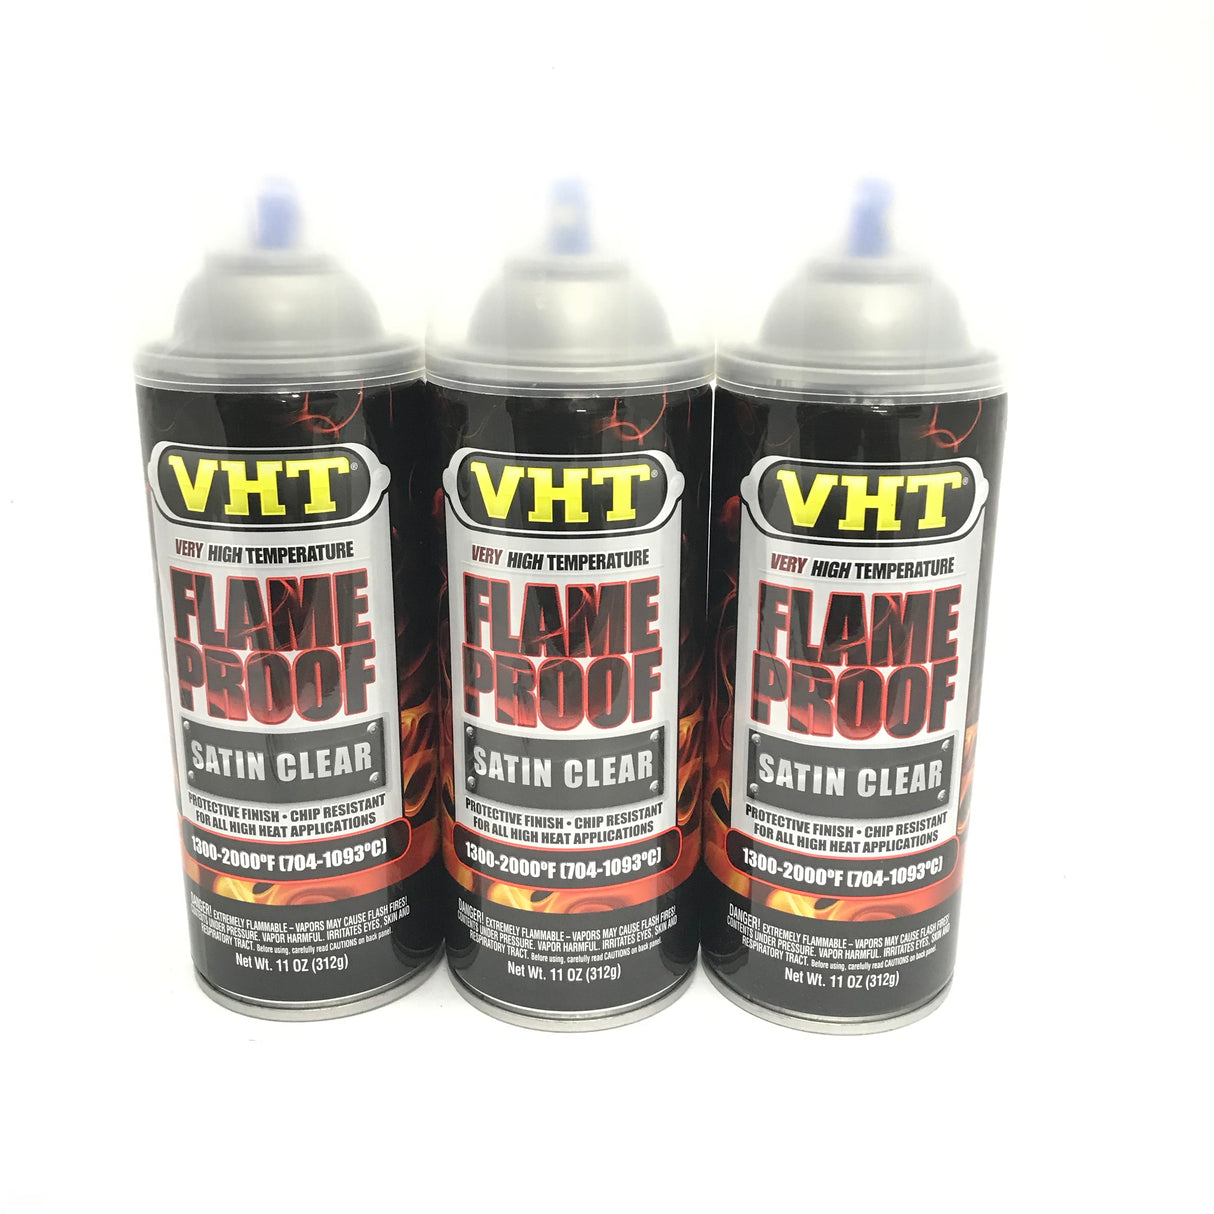 VHT SP115-3 PACK SATIN CLEAR High Temperature Flame Proof Header Paint - 11 oz